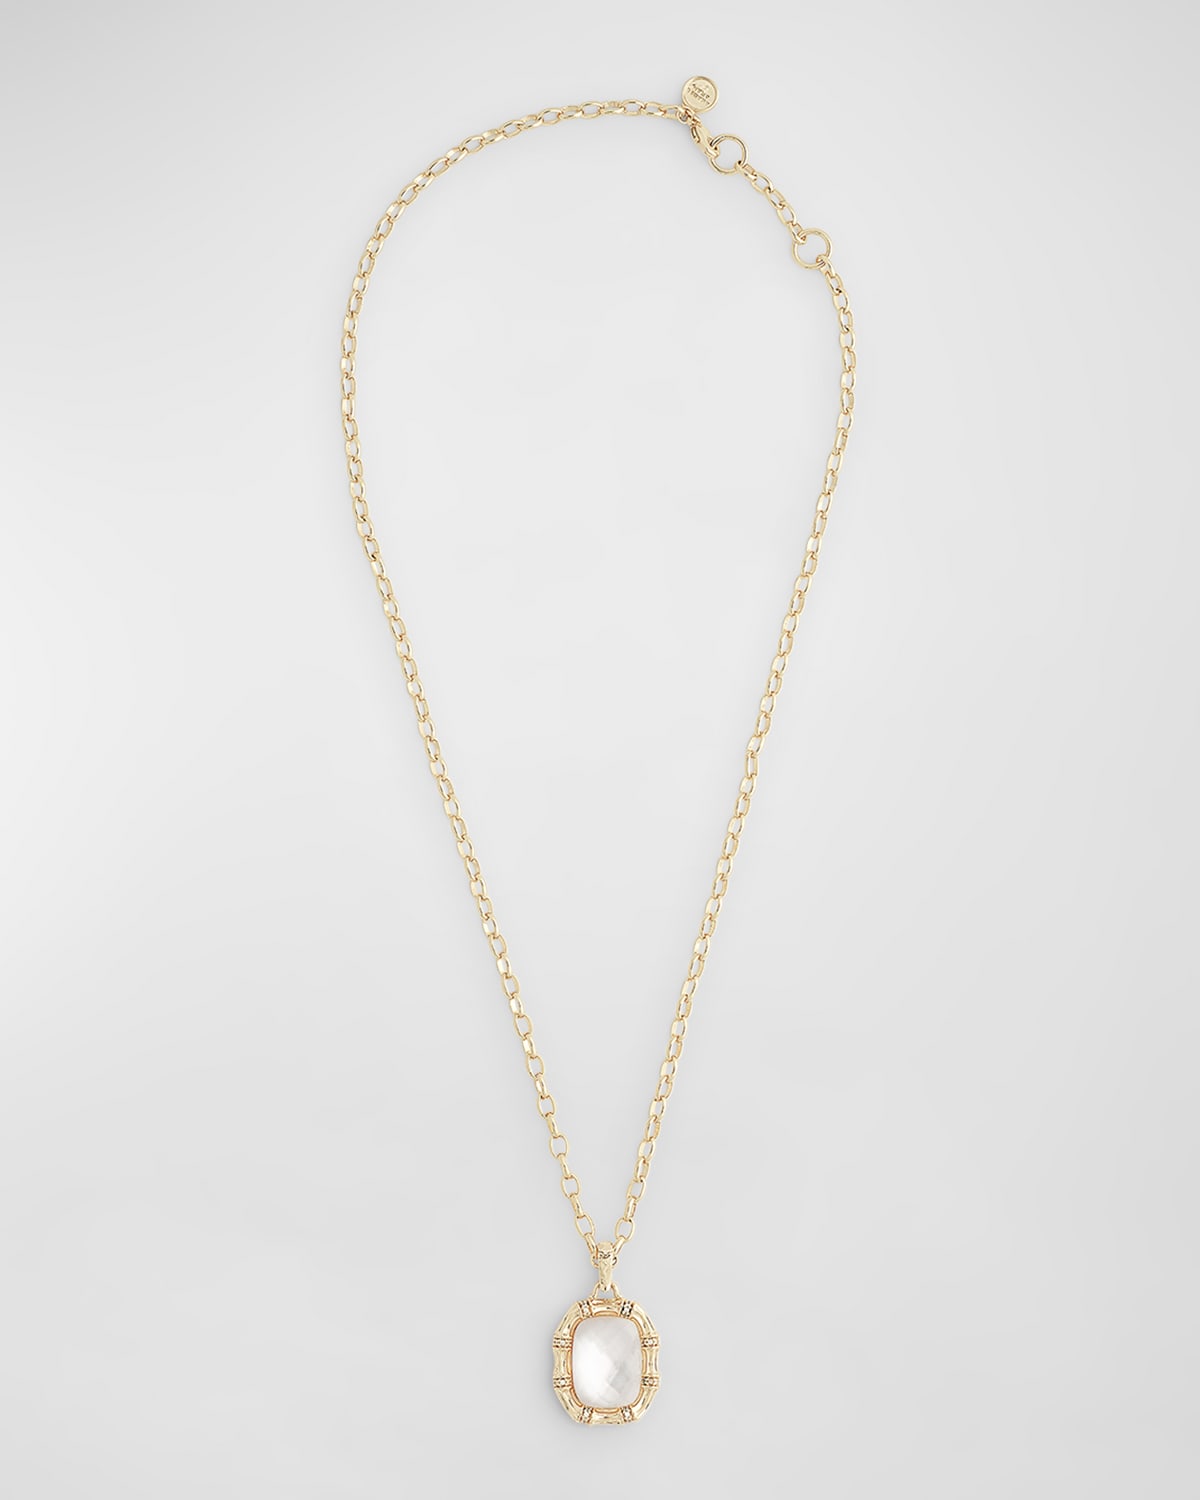 Anabel Aram Jewelry Bamboo With Stone Pendant Necklace In Gold